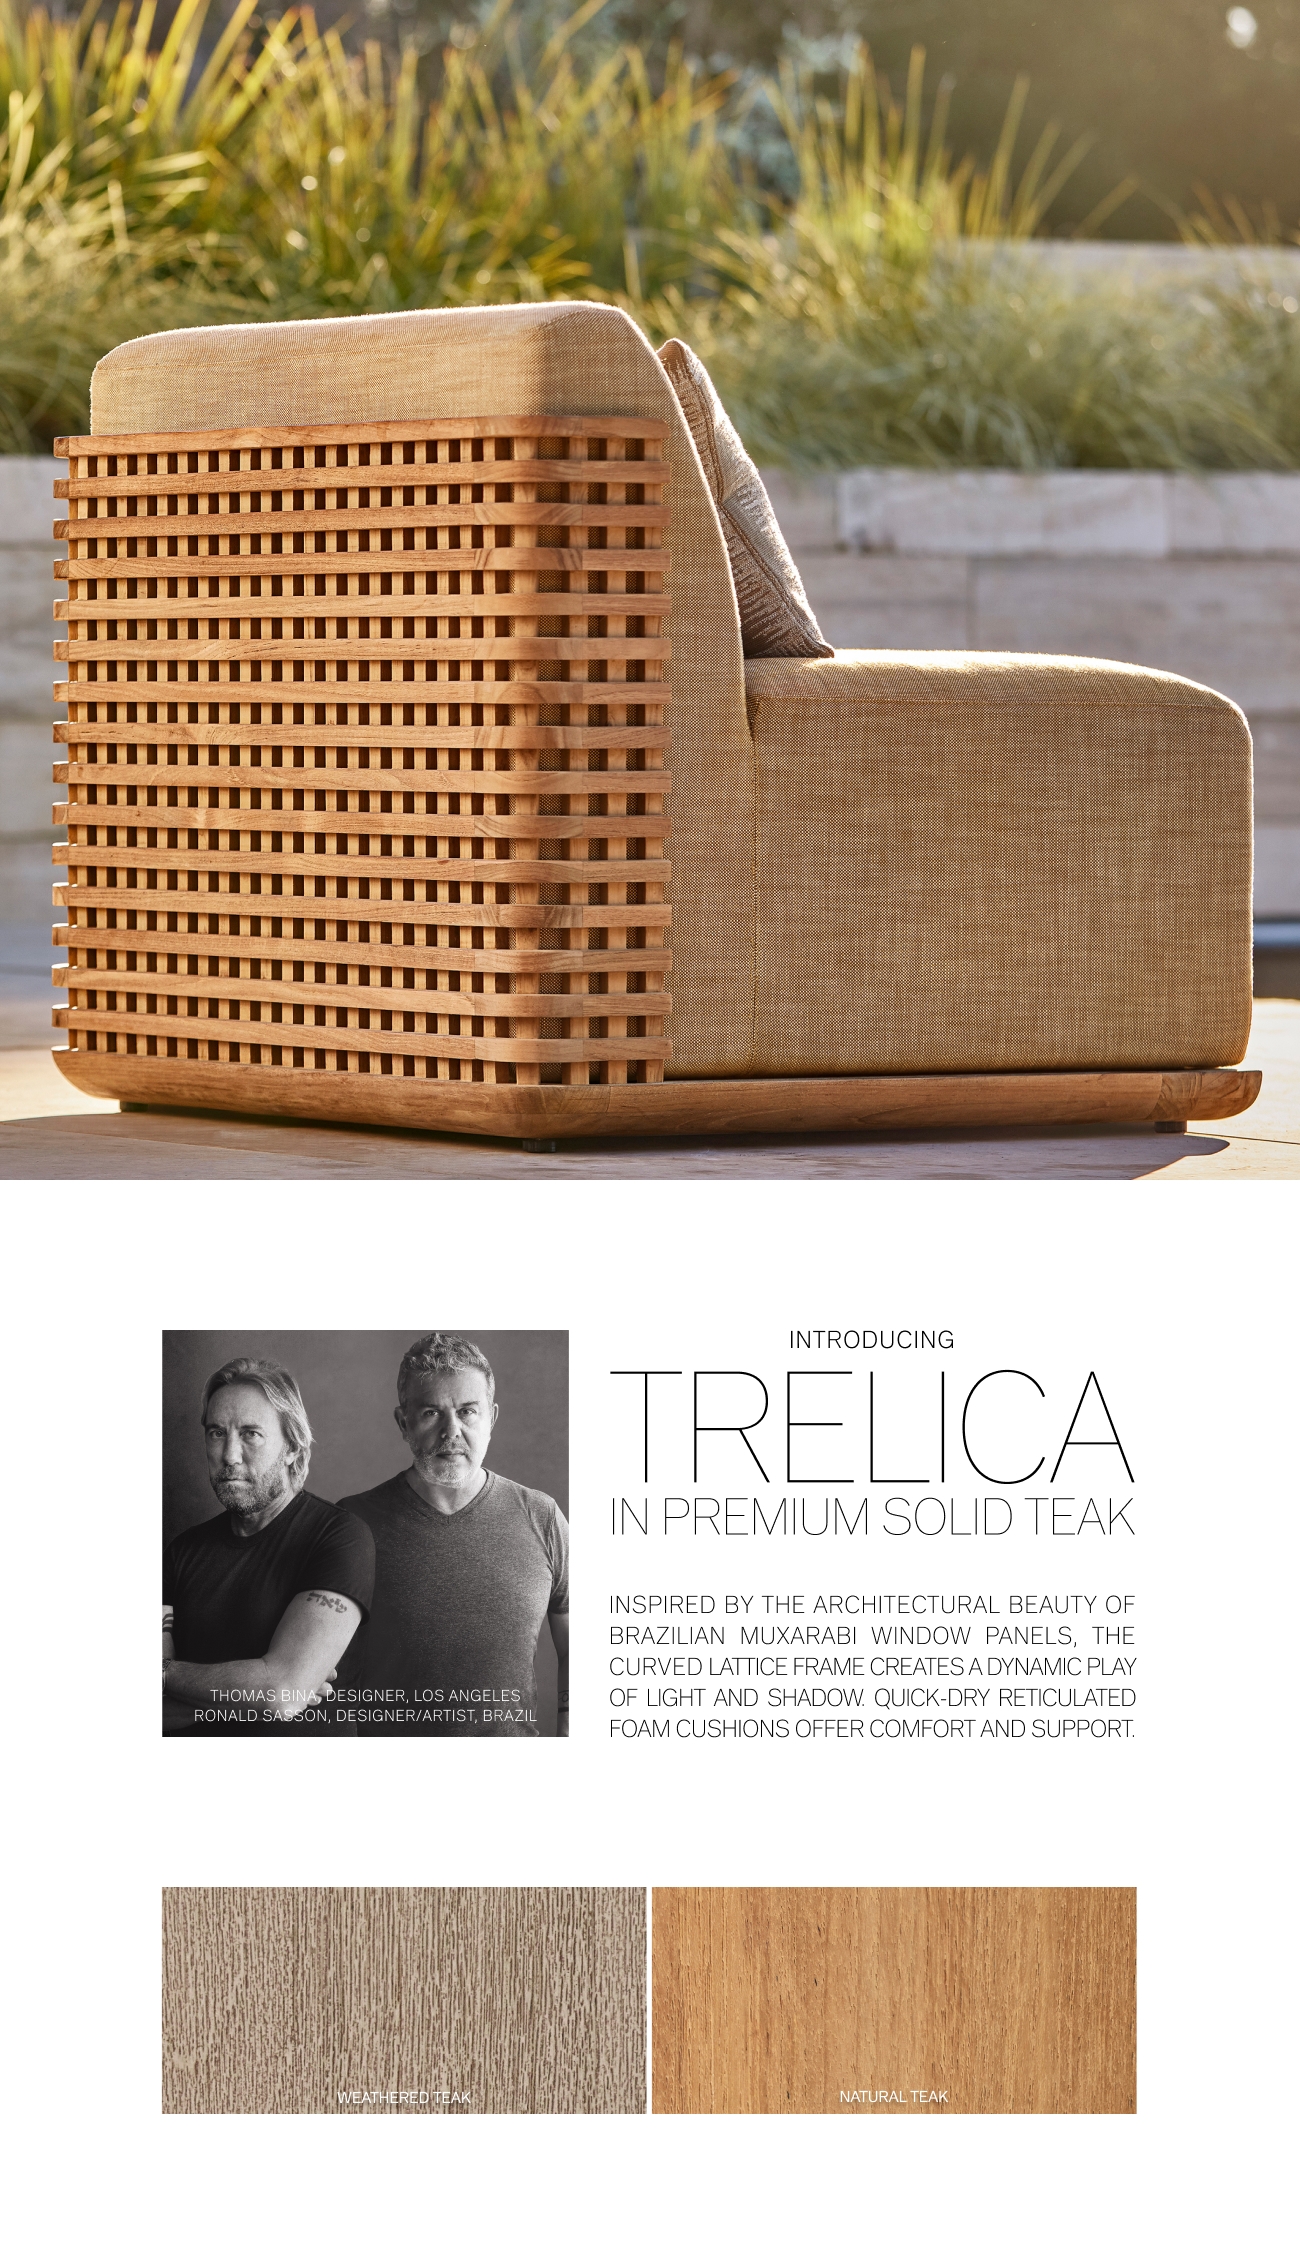 A, ON, DESIGNER i WEATHEREQ%AK i INTRODUCING TRELICA IN PREMIUM SOLID TEAK INSPIRED BY THE ARCHITECTURAL BEAUTY OF BRAZILIAN MUXARABI WINDOW PANELS, THE CURVED LATTICE FRAME CREATES A DYNAMIC PLAY OF LIGHT AND SHADOW. QUICK-DRY RETICULATED FOAM CUSHIONS OFFER COMFORT AND SUPPORT. NATURAL TEAK 